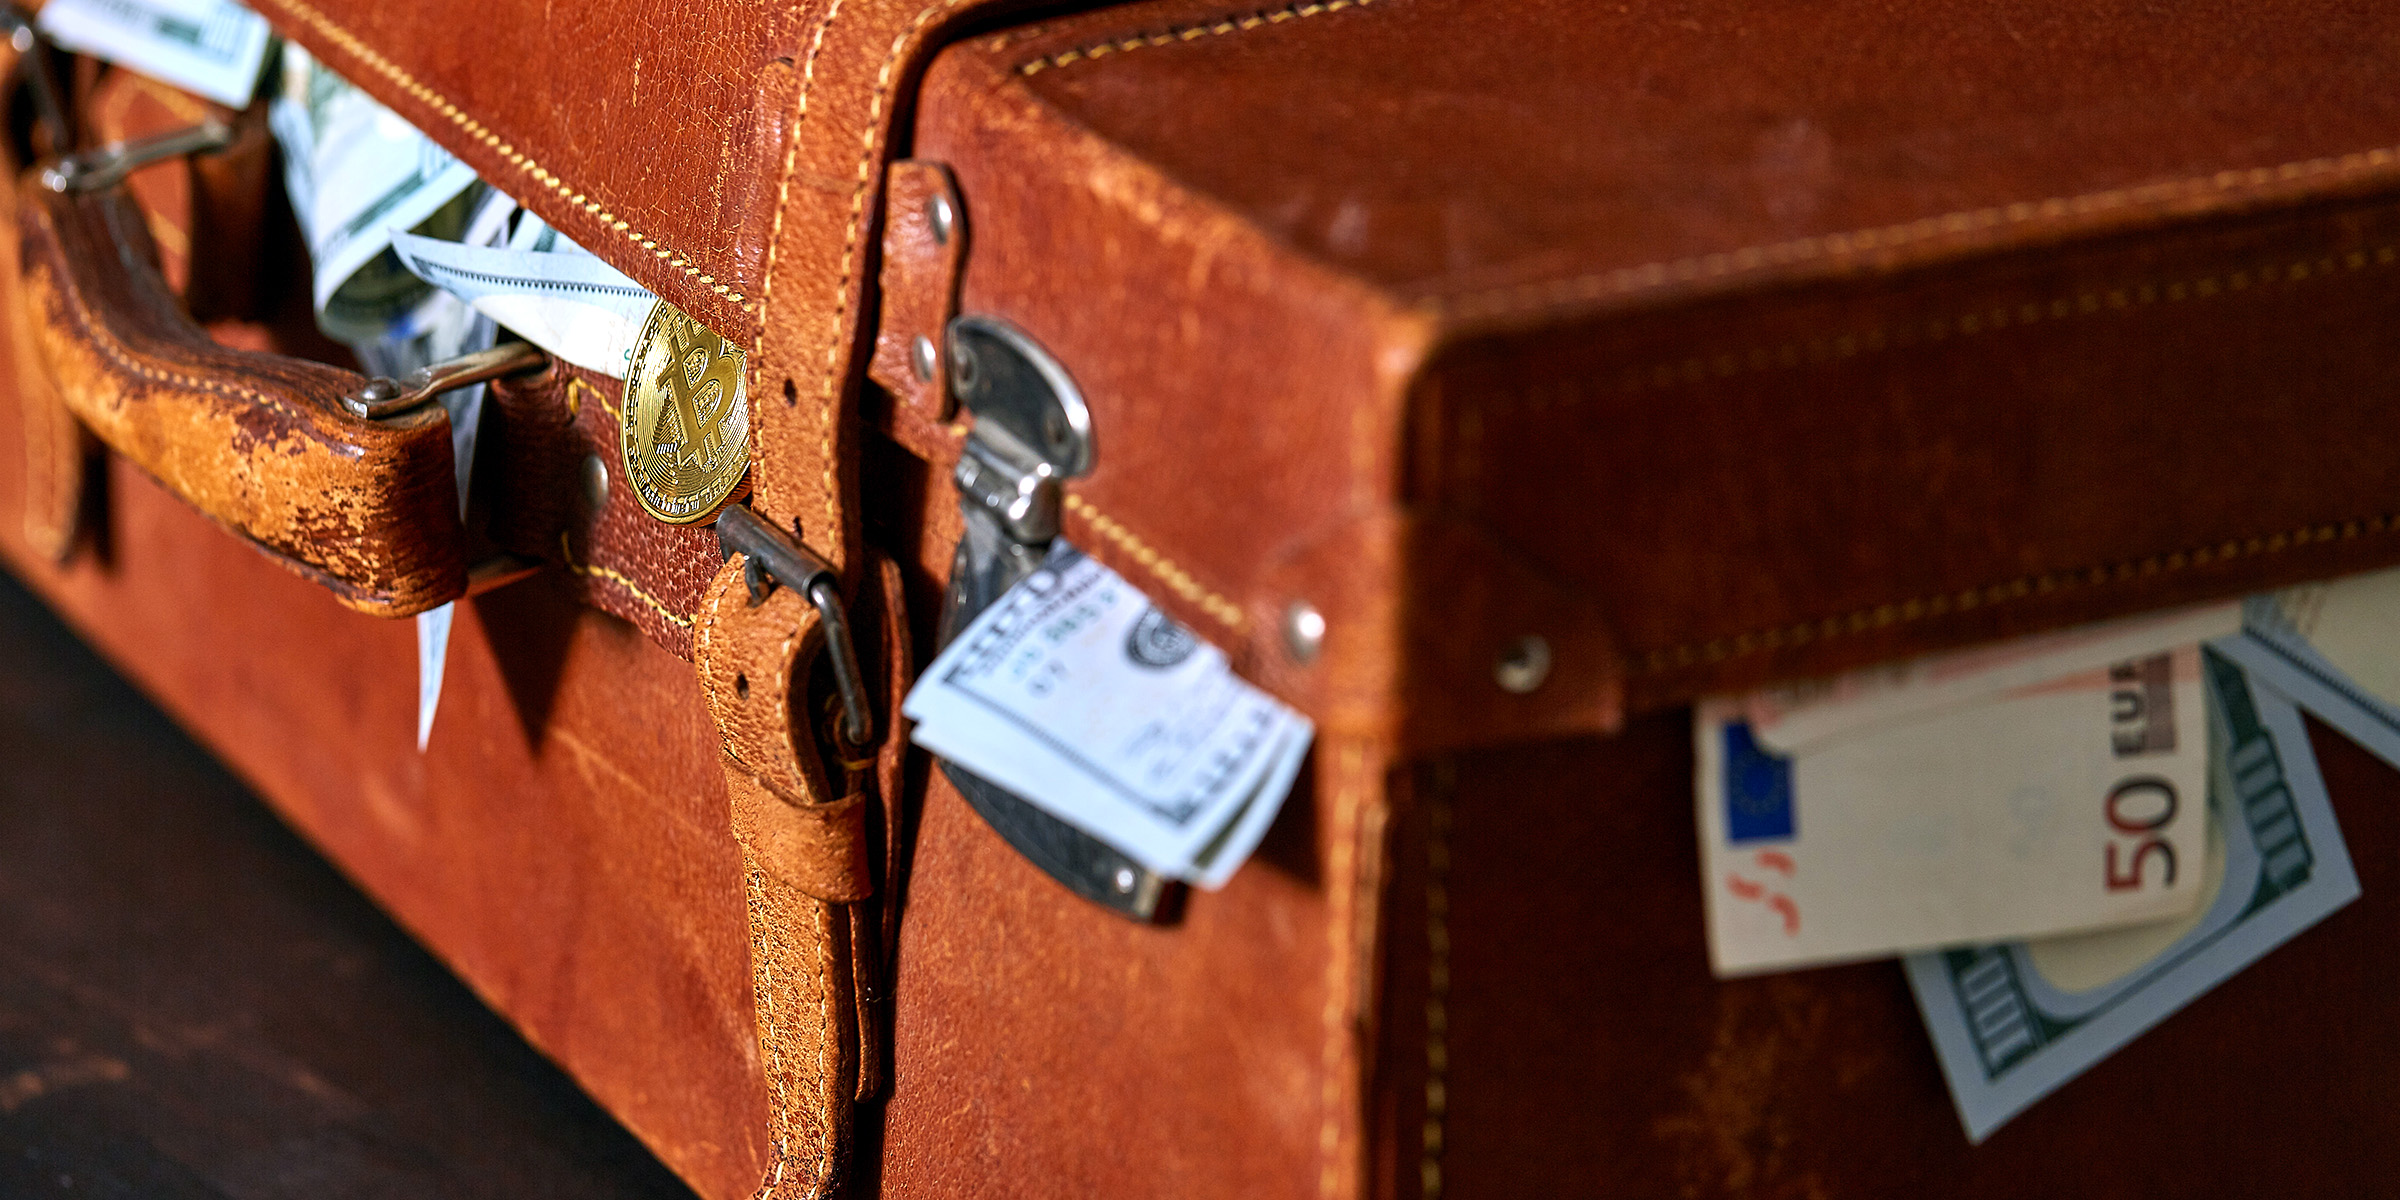 A suitcase full of money | Source: Shutterstock